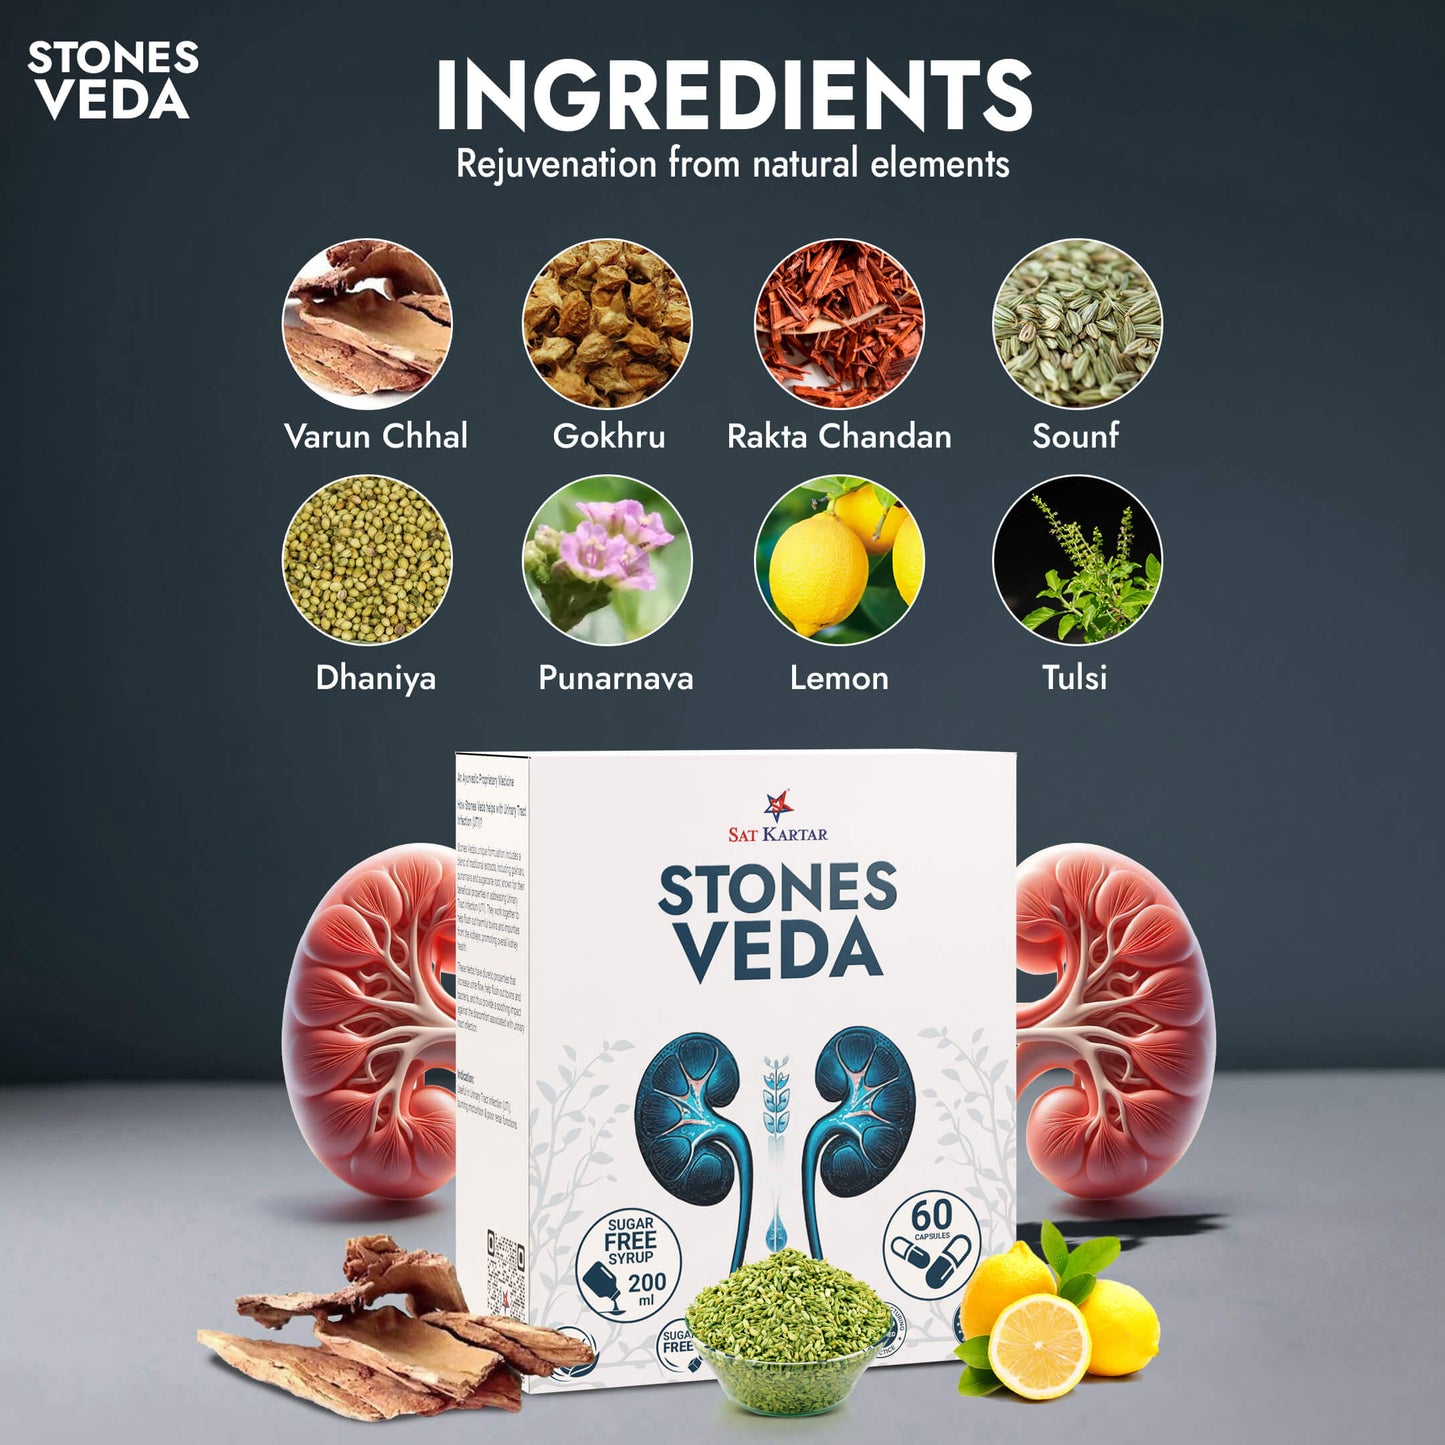 Stones Veda | Ayurvedic Medicine for Kidney Stone & Gall Bladder Stone | Kidney Stone Syrup | Stone Removal Capsules & Syrup | Kidney Stone Treatment Without Surgery